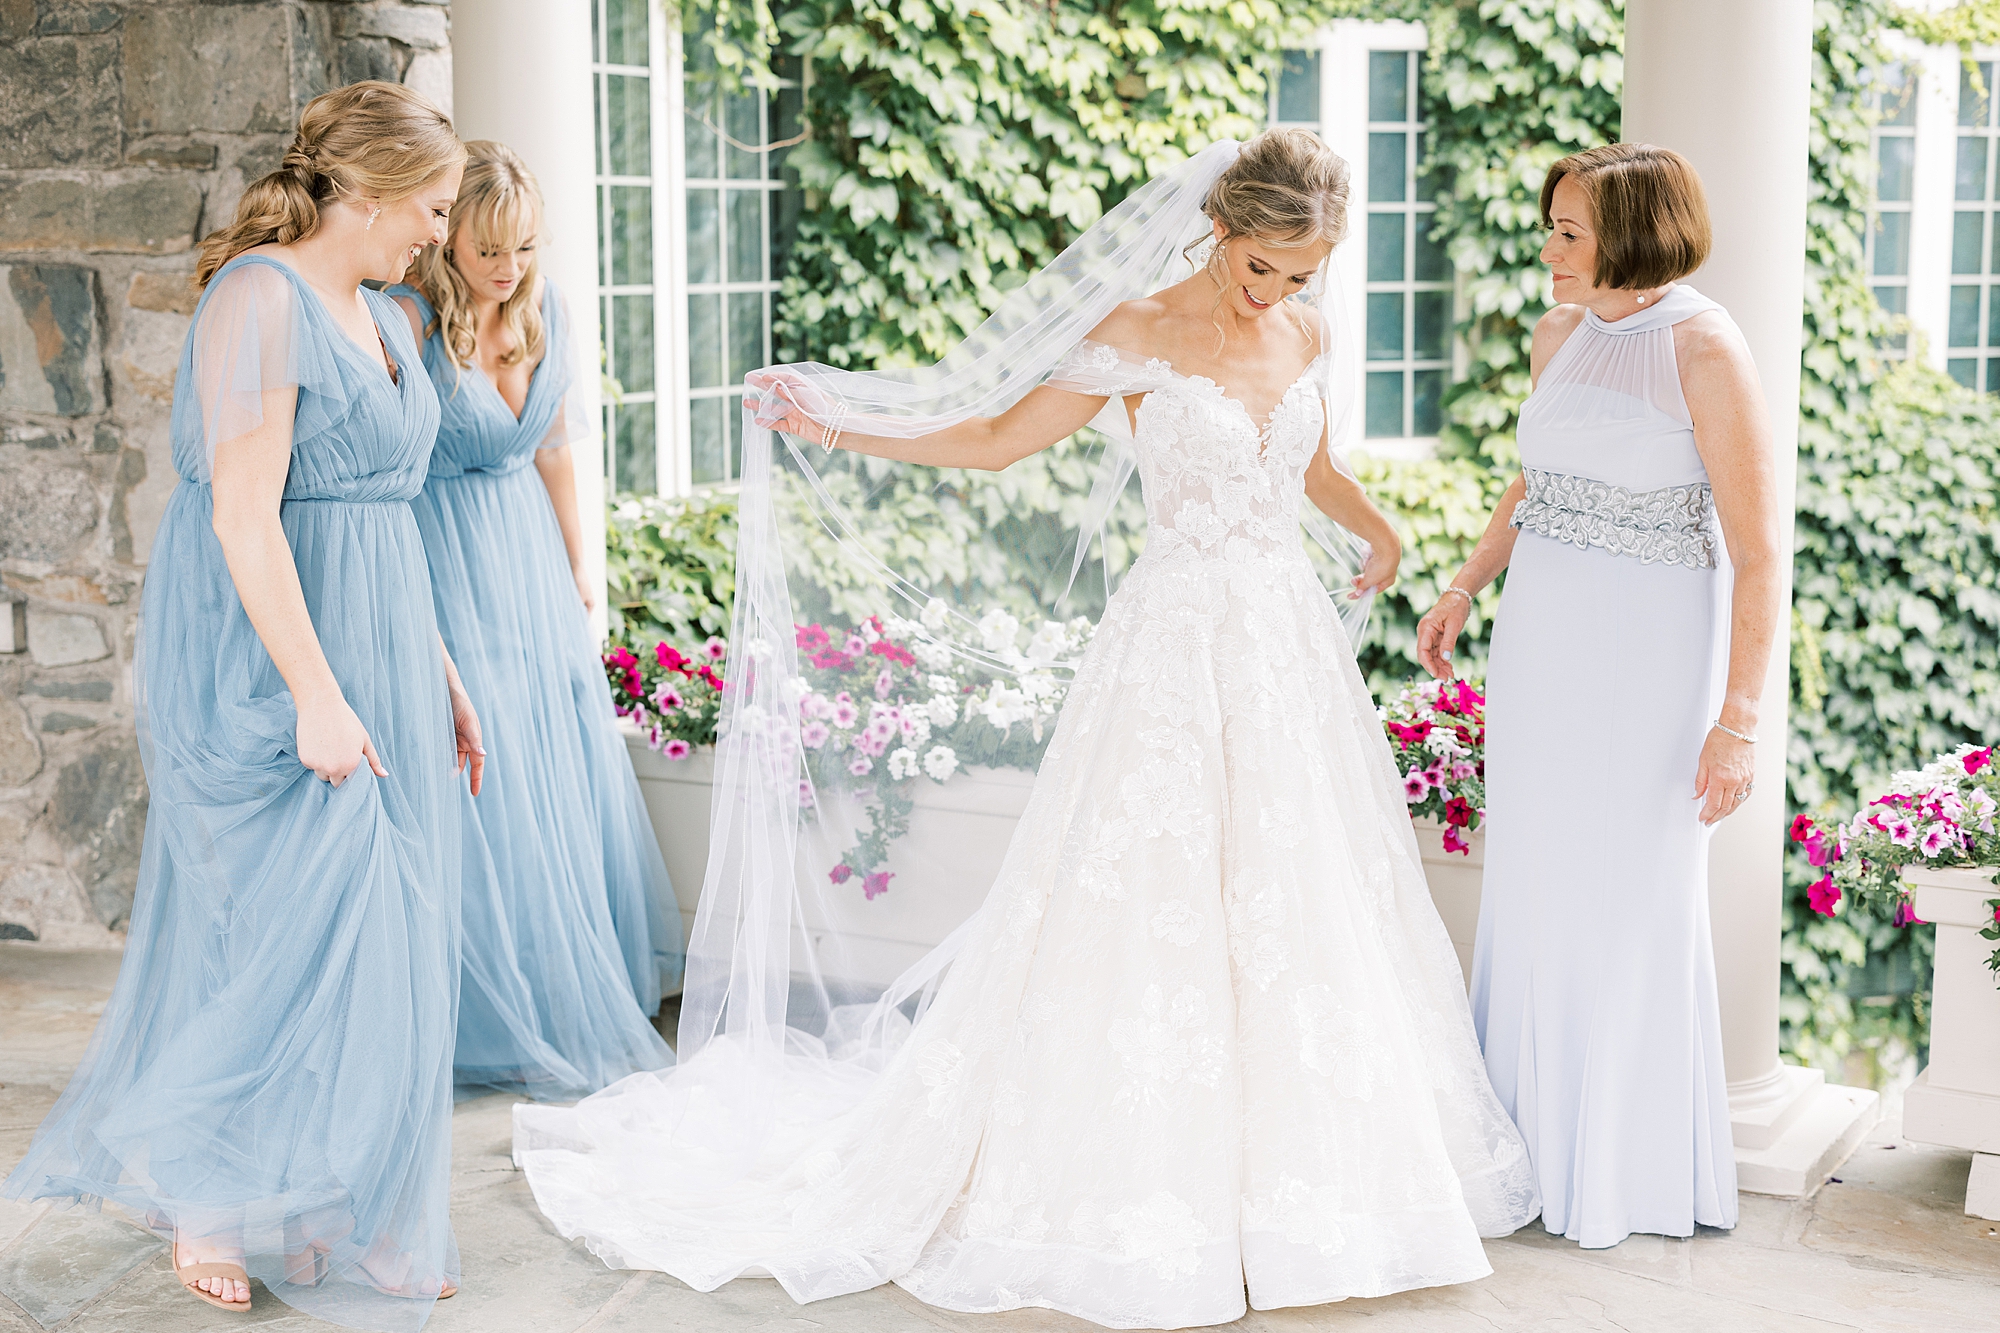 bride shows off wedding dress and veil to mother and bridesmaids 